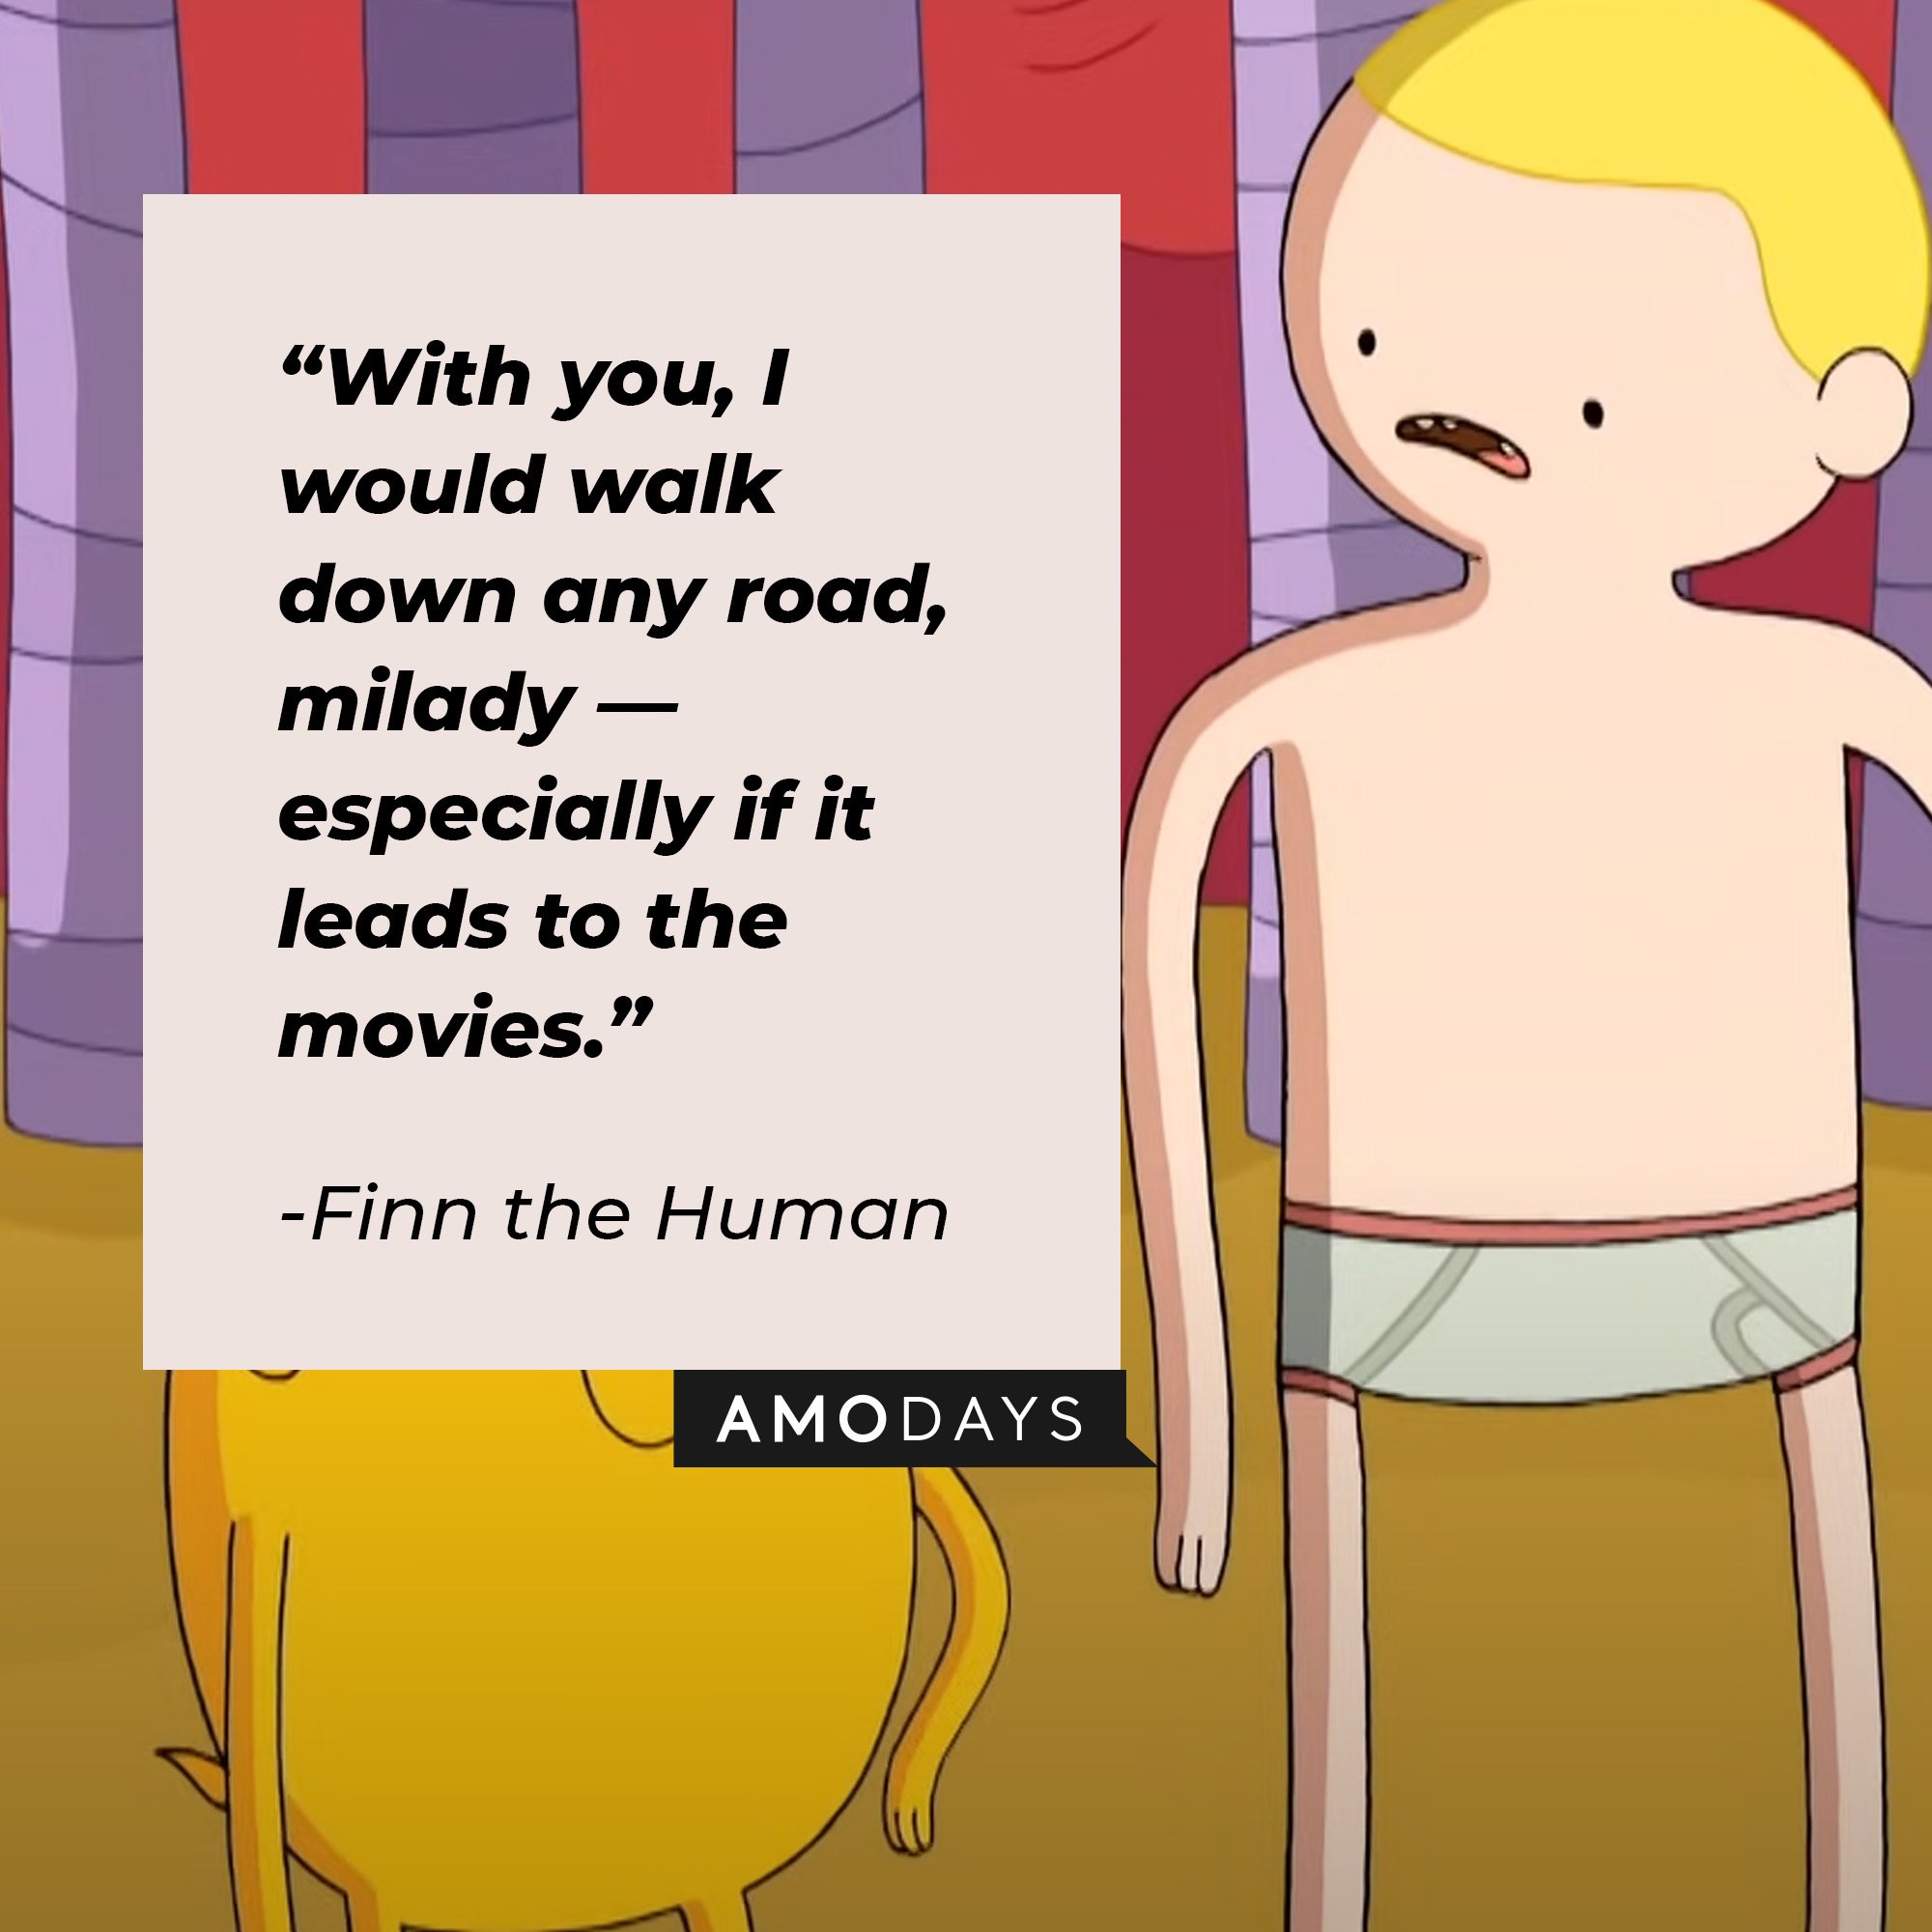 Finn the Human’s quote: “With you, I would walk down any road, milady — especially if it leads to the movies.”| Image: AmoDays